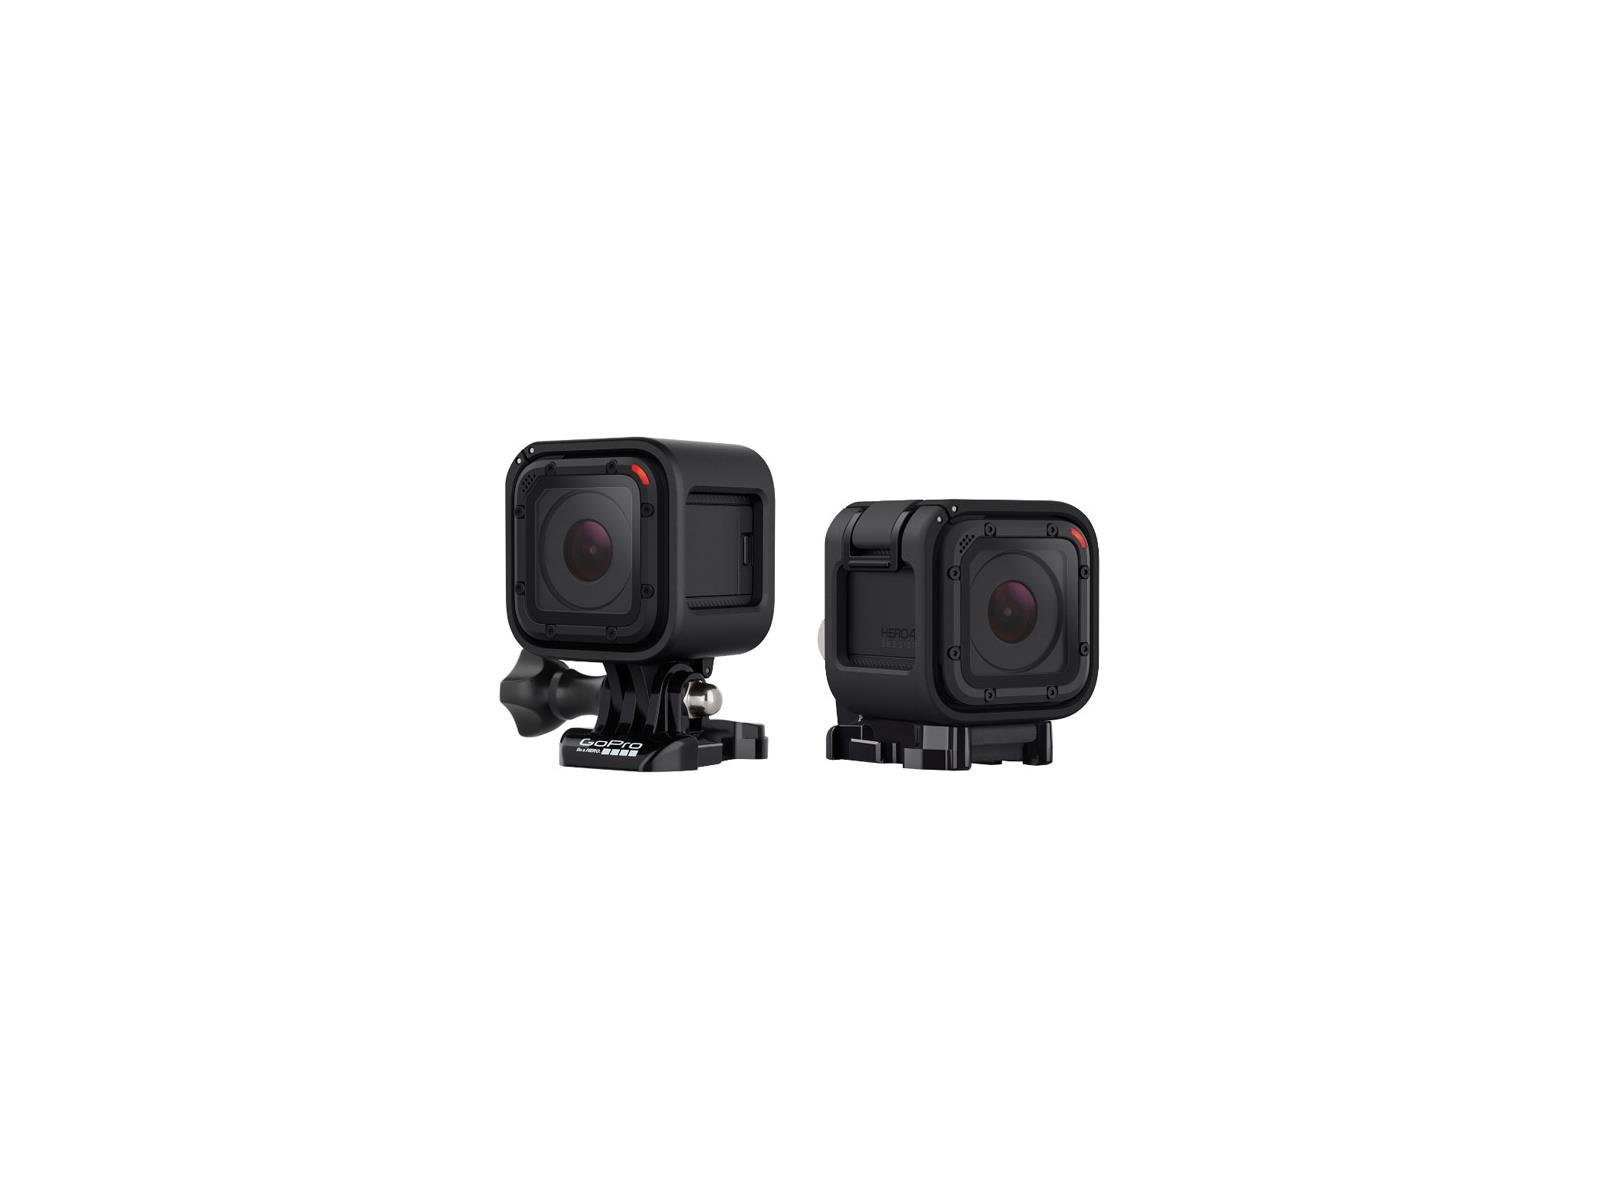 Gopro Hero 4 Session Action Cam Just Became A Lot More Attractive With 199 Msrp Hothardware